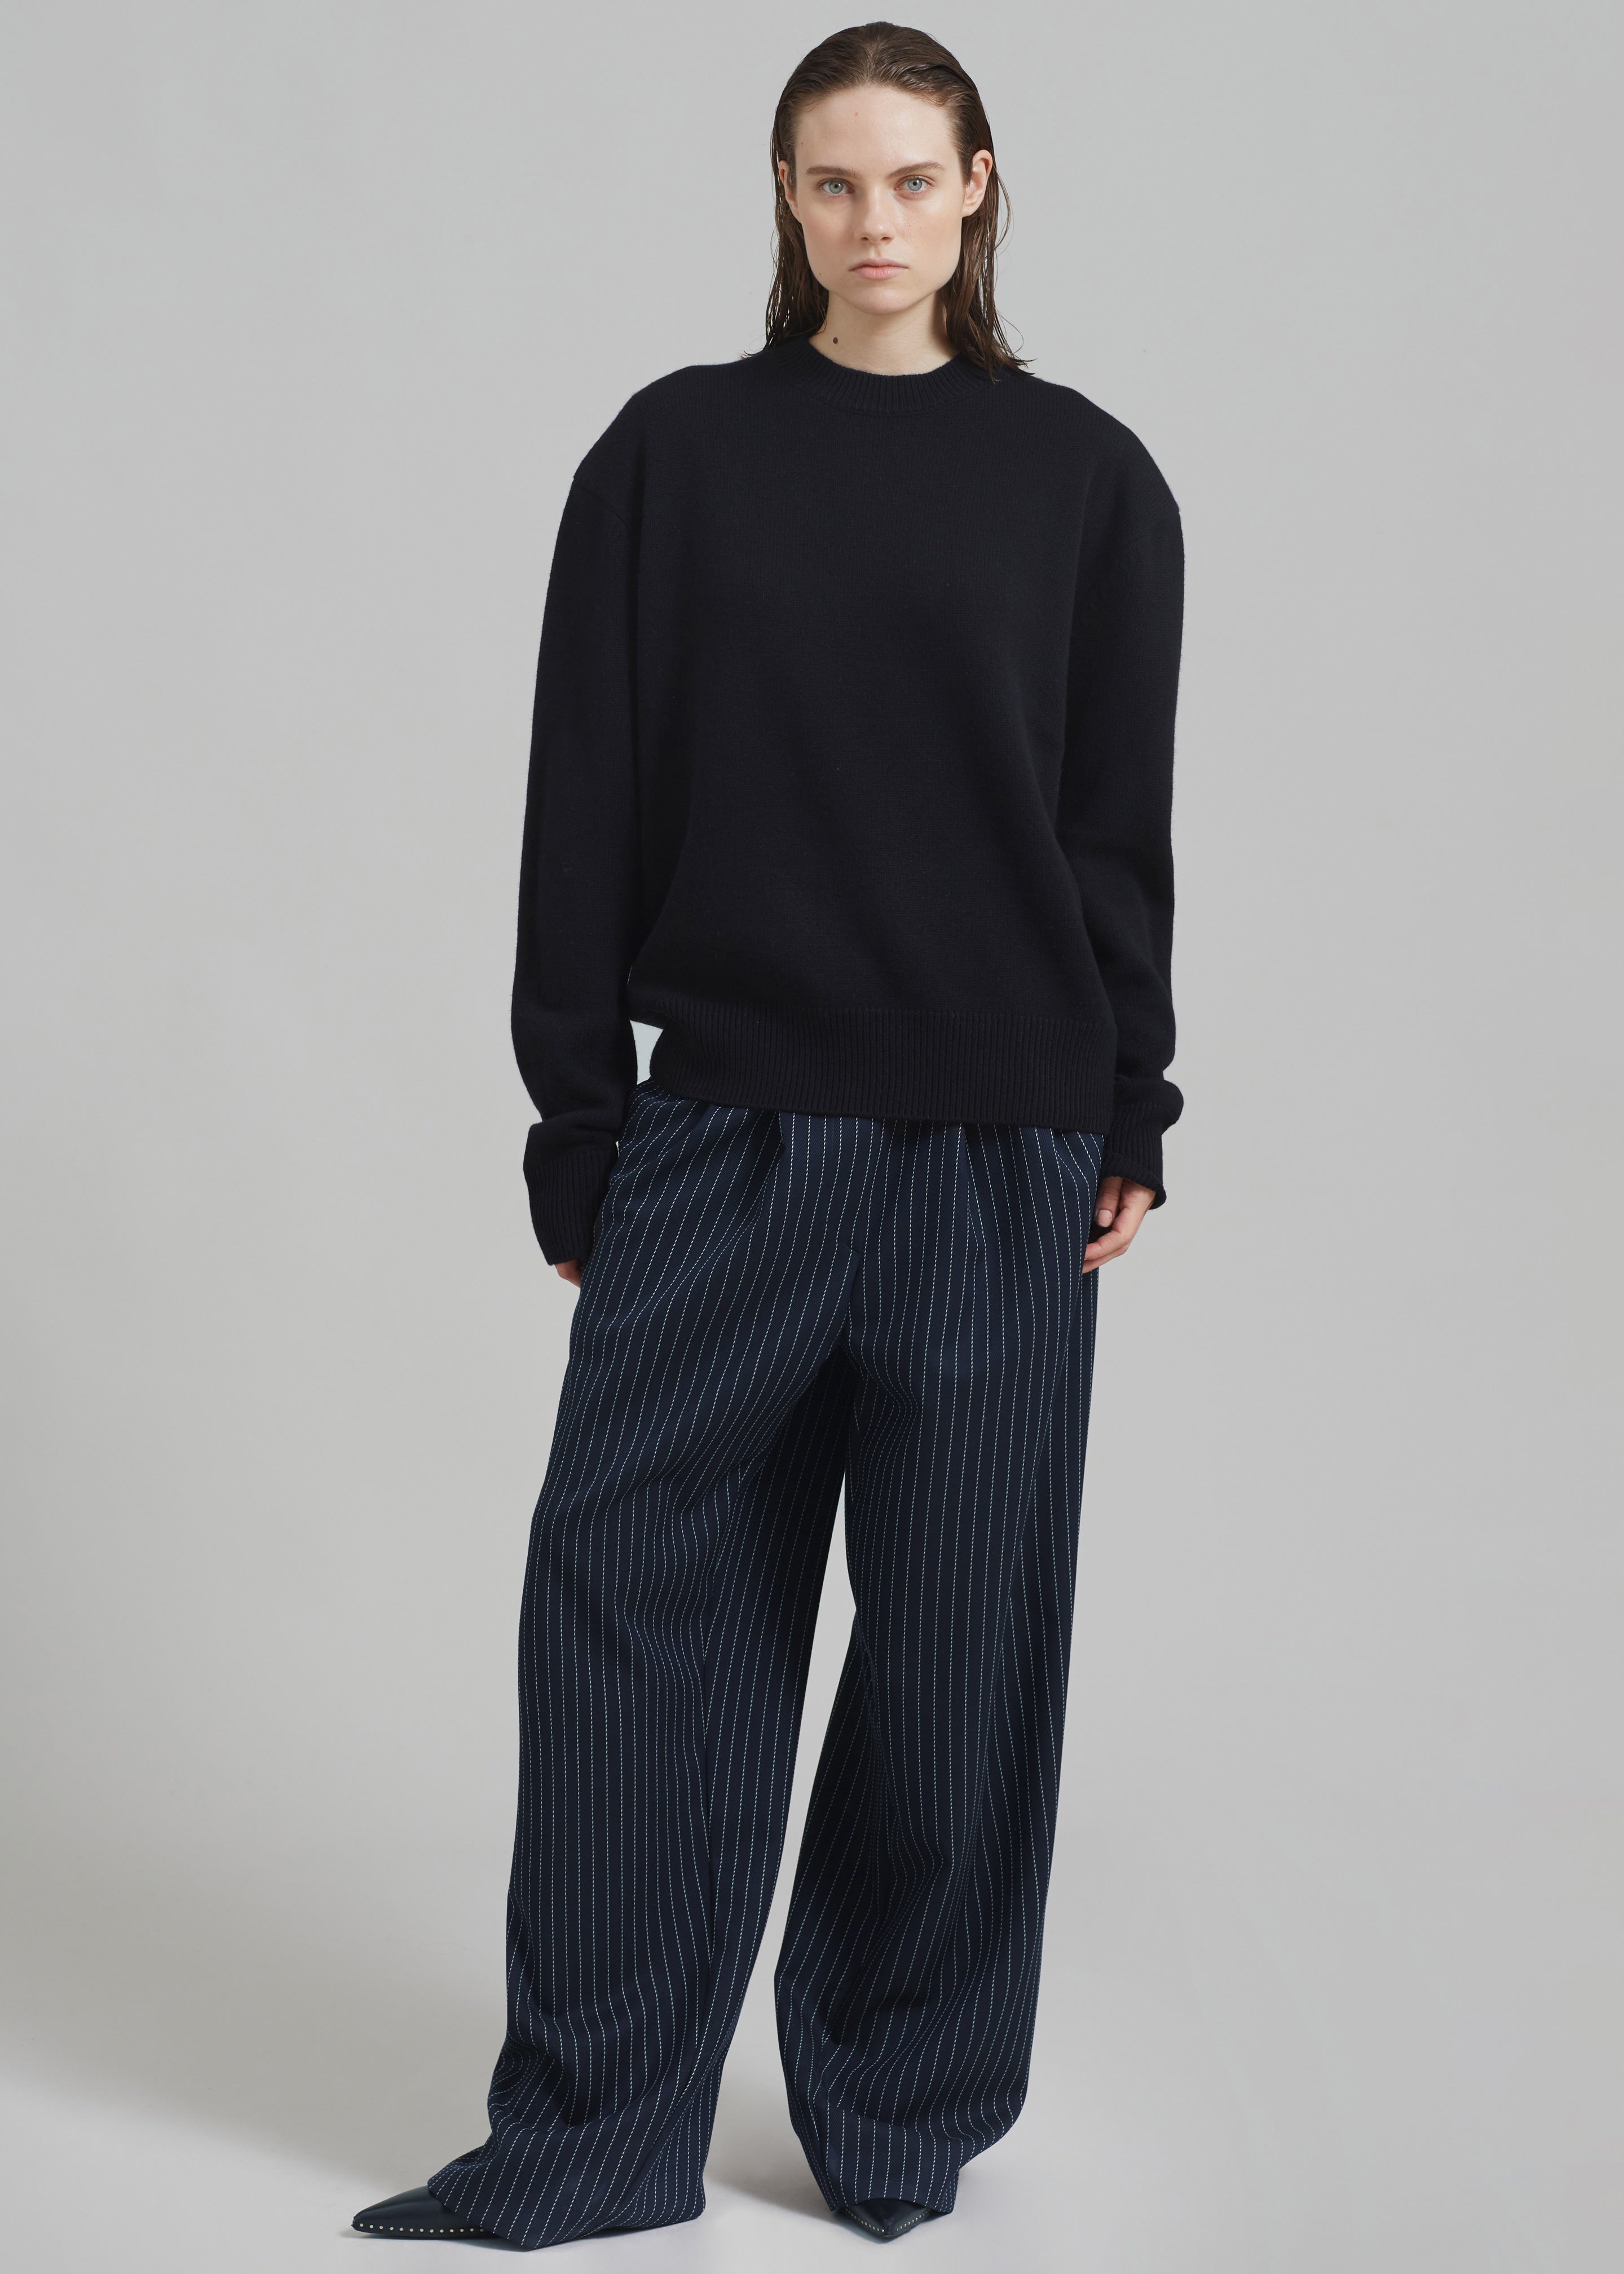 Ripley Pleated Twill Trousers - Navy/White Pinstripe - 8